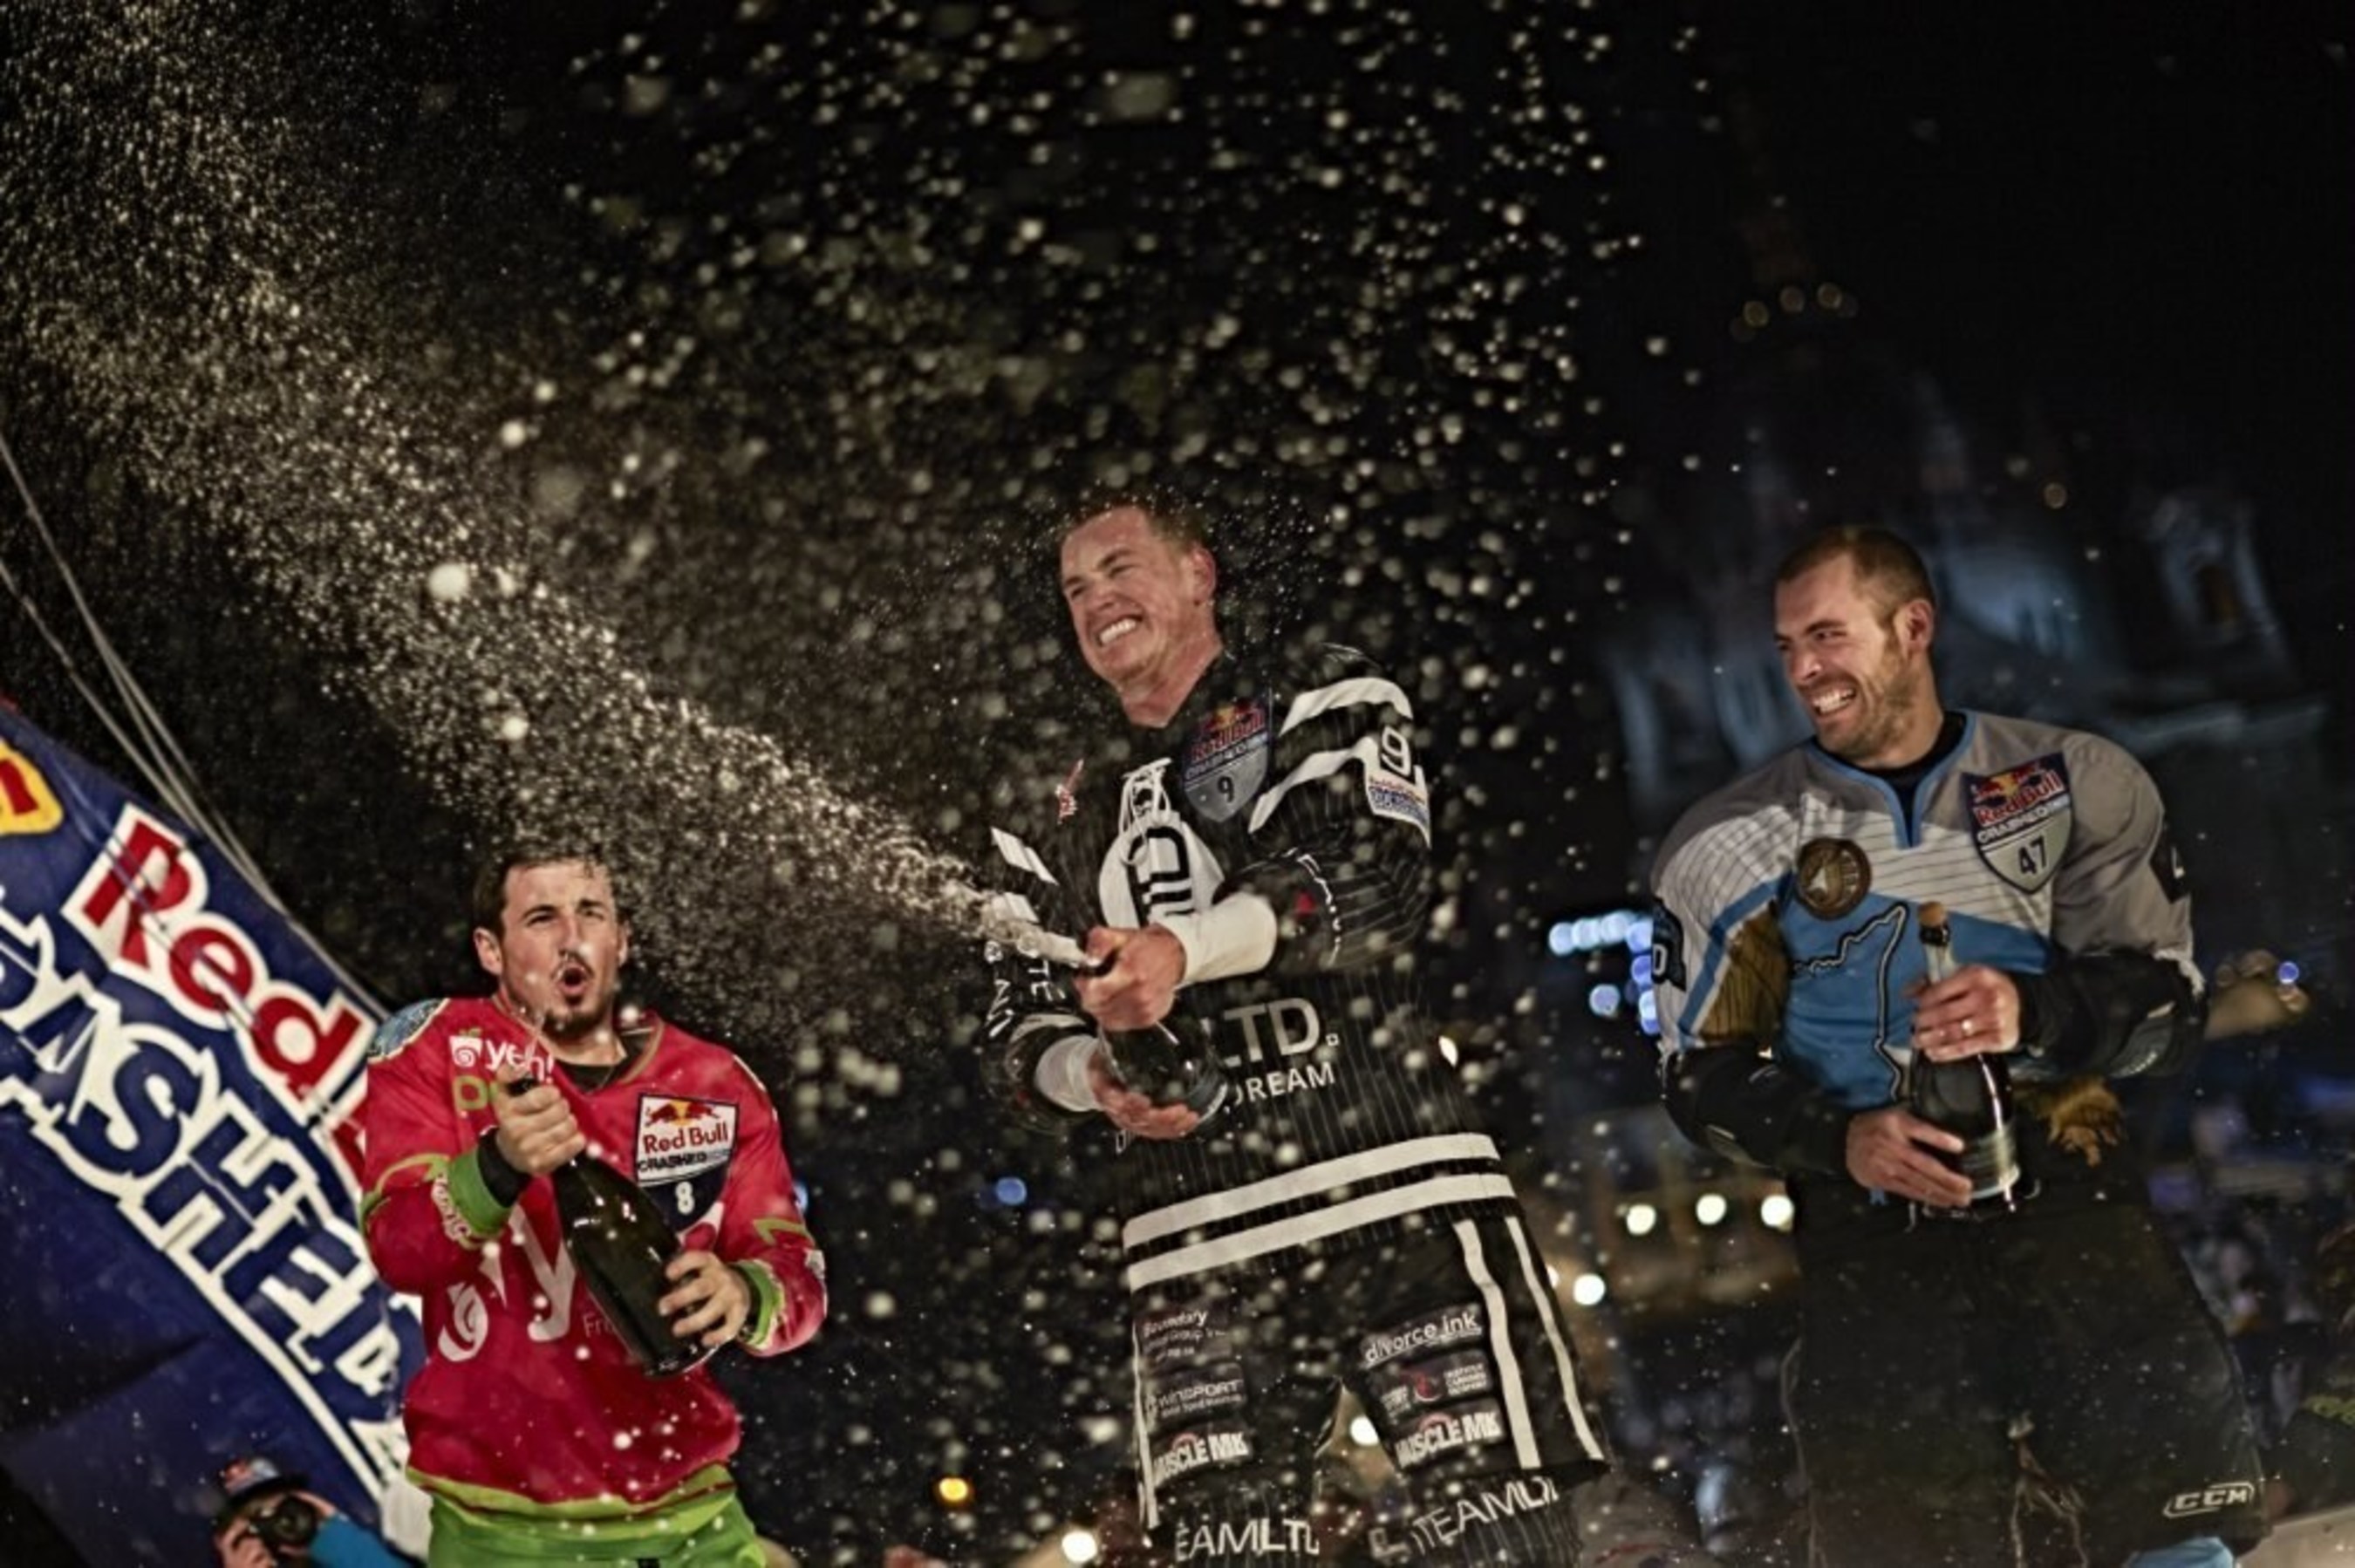 Kyle Croxall grabs third victory in four years at Red Bull Crashed Ice Saint Paul 2015.